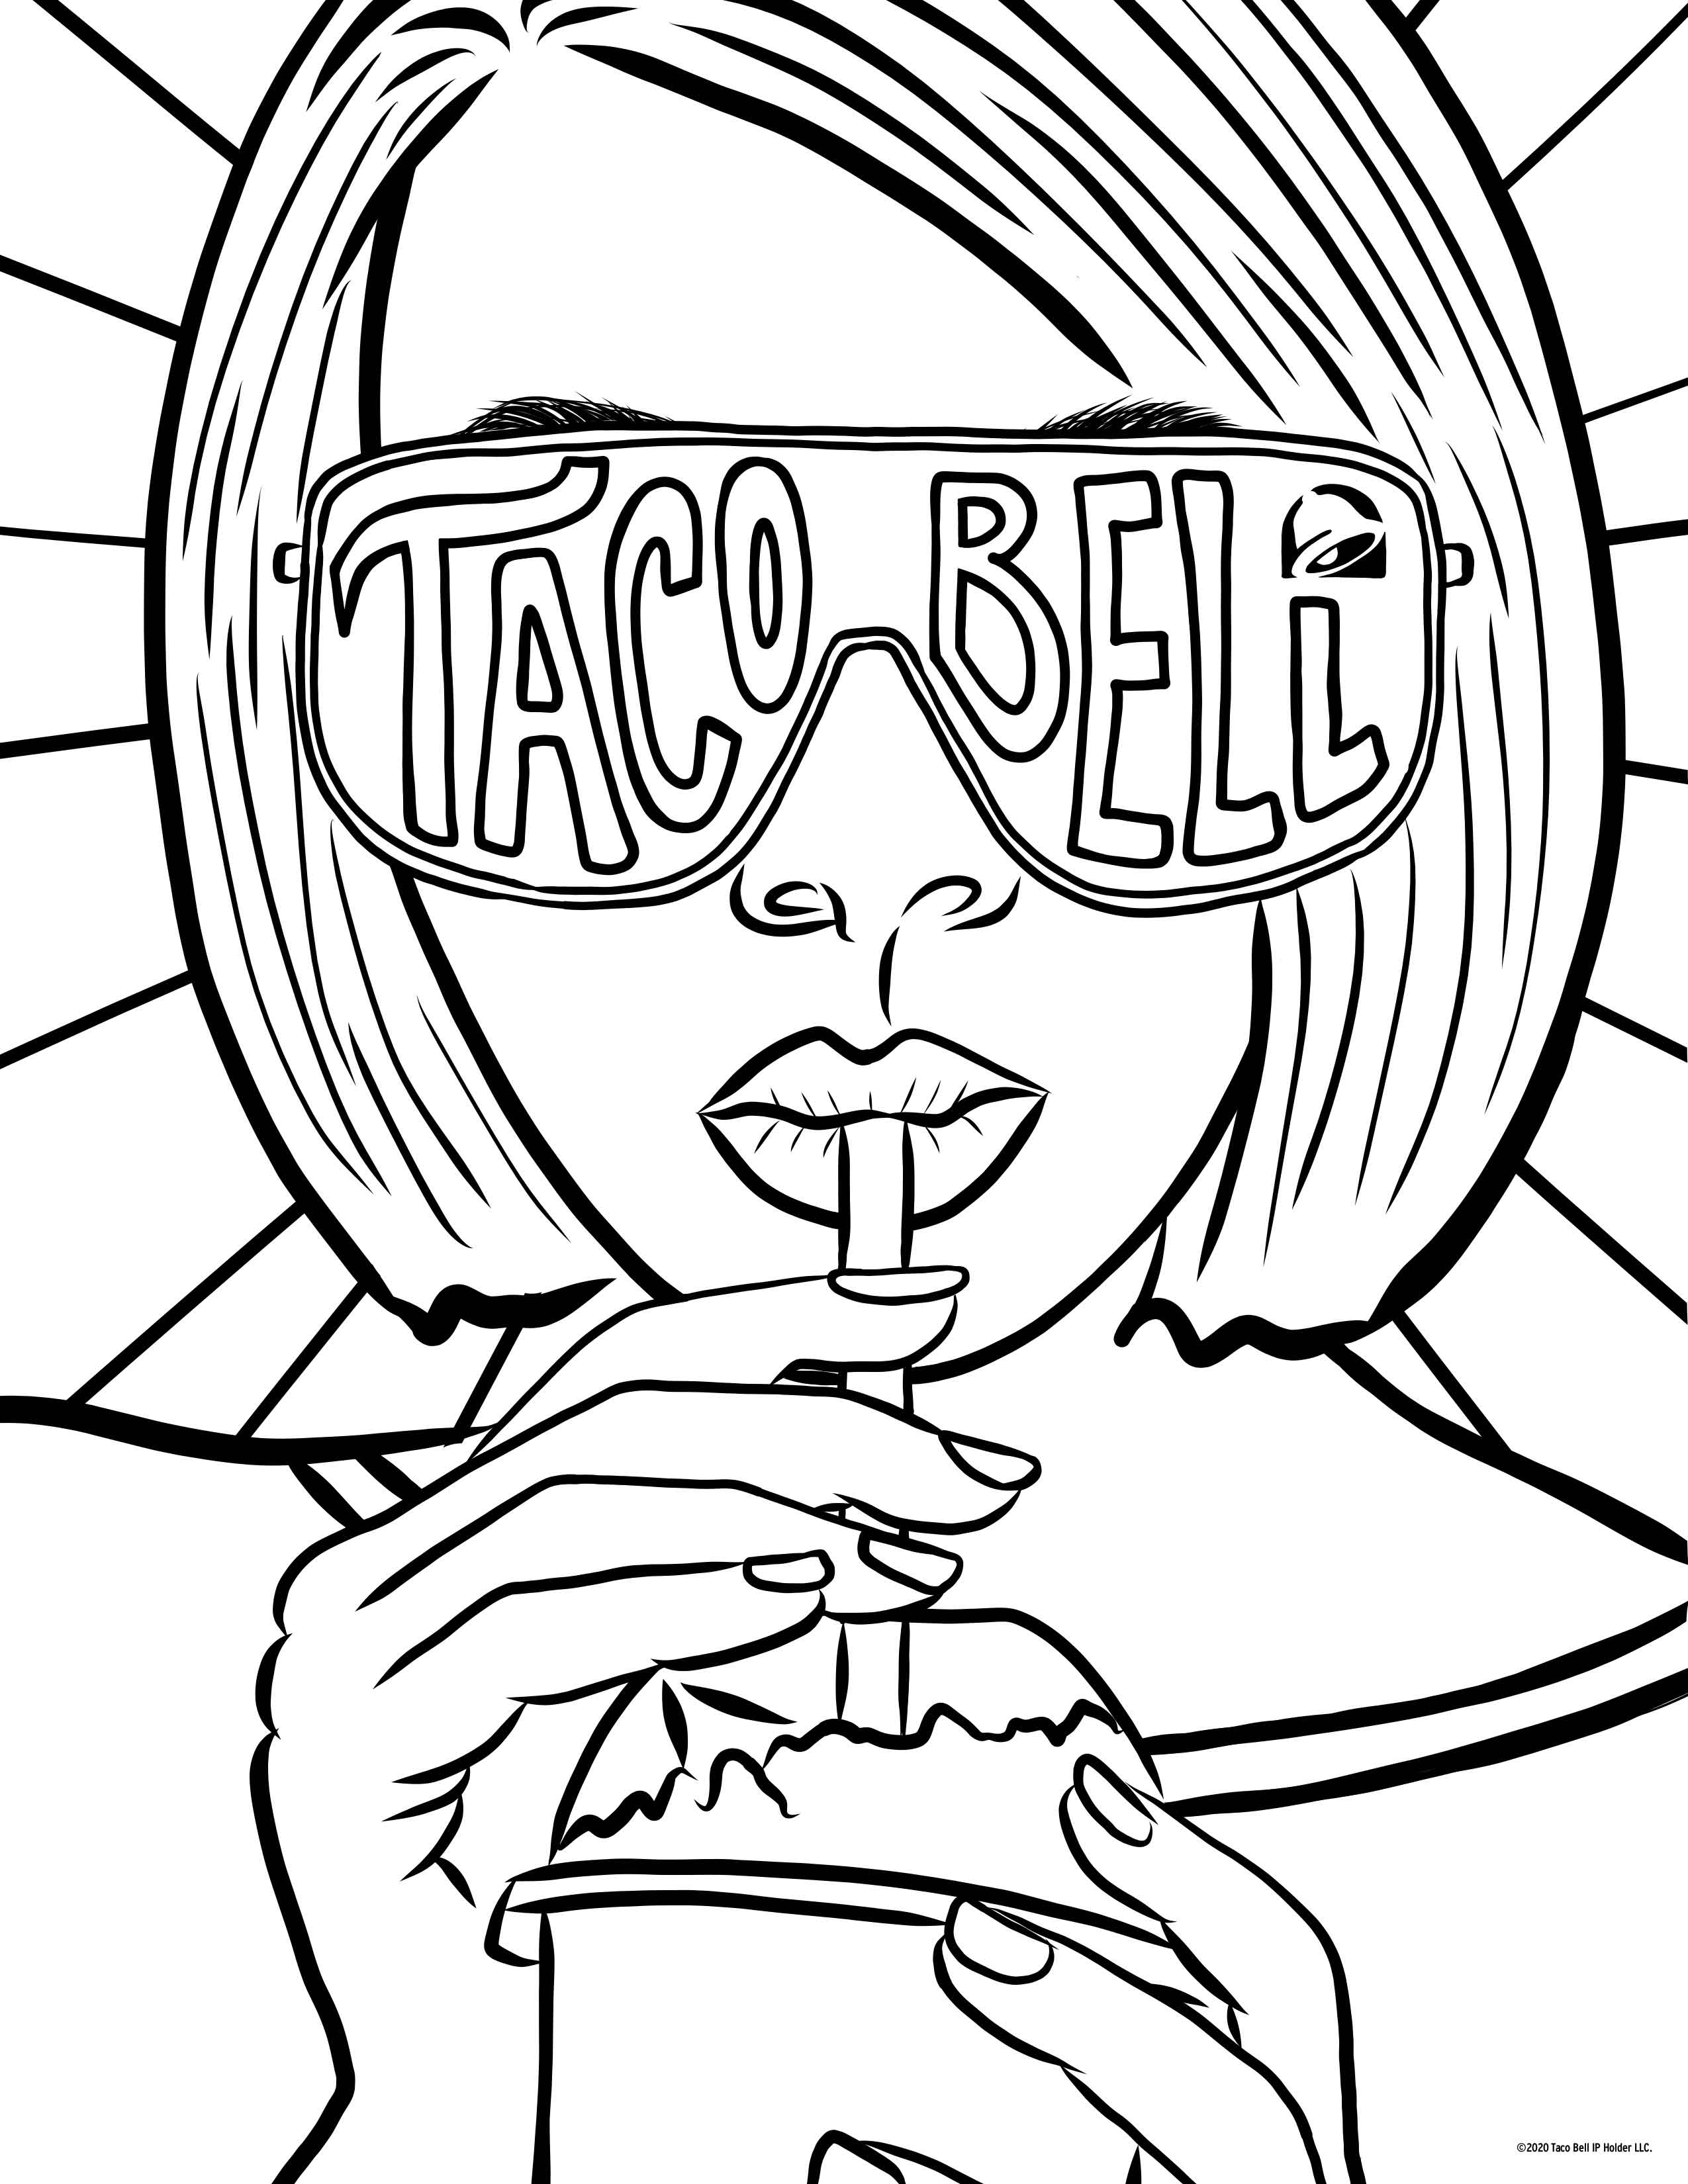 Taco Bell Coloring Pages You Didn't Know You Needed   Coloring Home